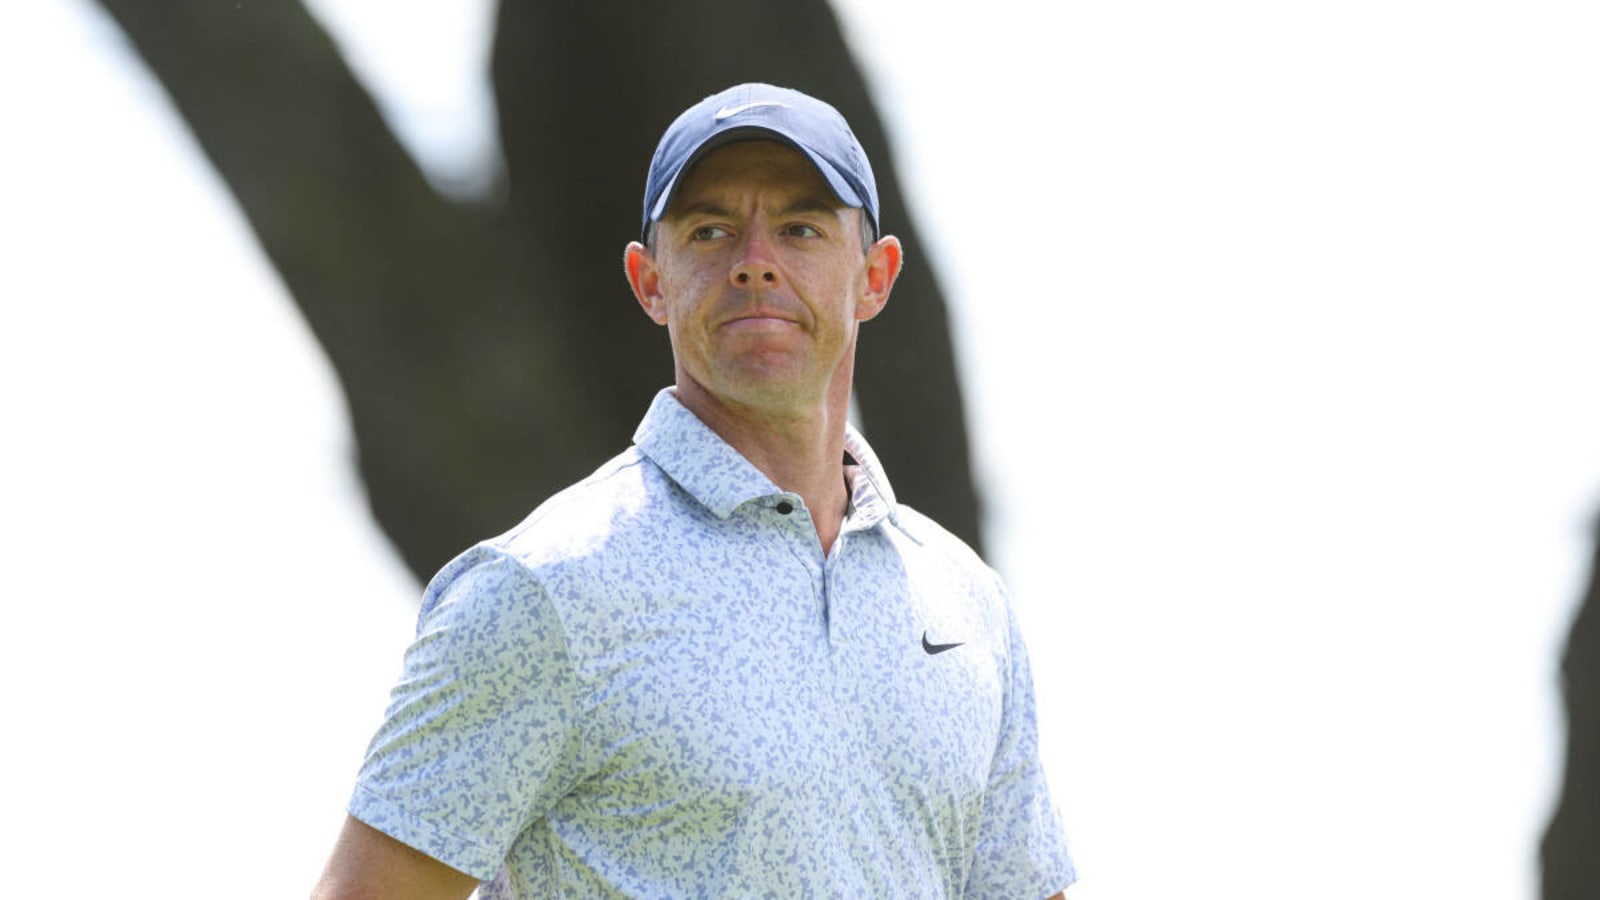 Rory McIlroy Talks Schedule Change Ahead of Masters, Confirms Visit to Butch Harmon